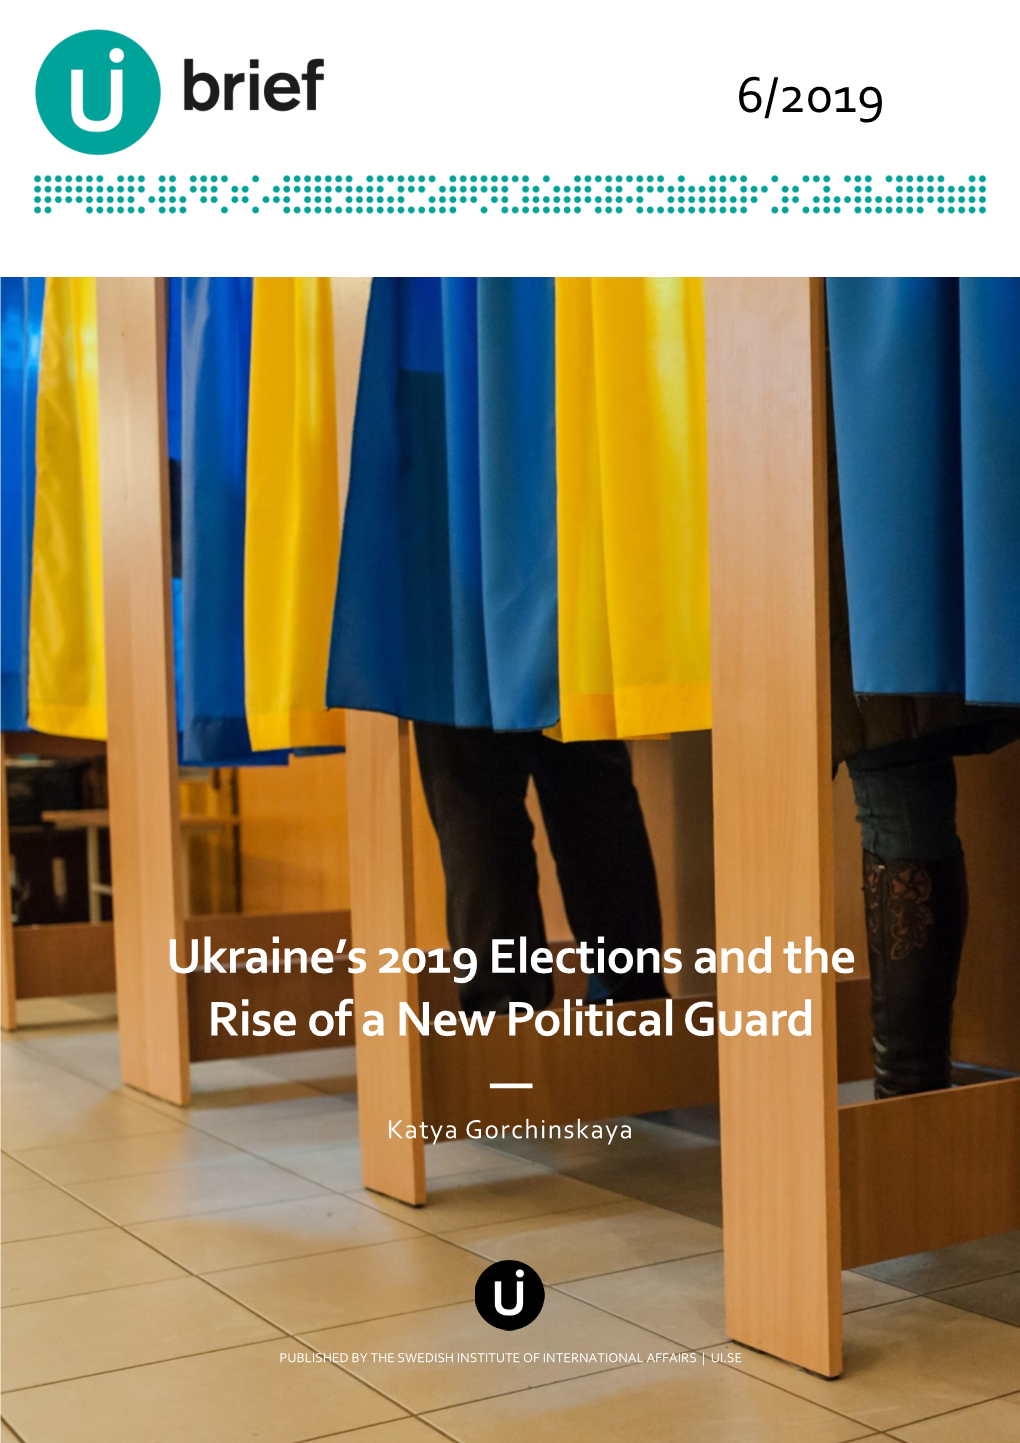 Ukraine's 2019 Elections and the Rise of a New Political Guard —